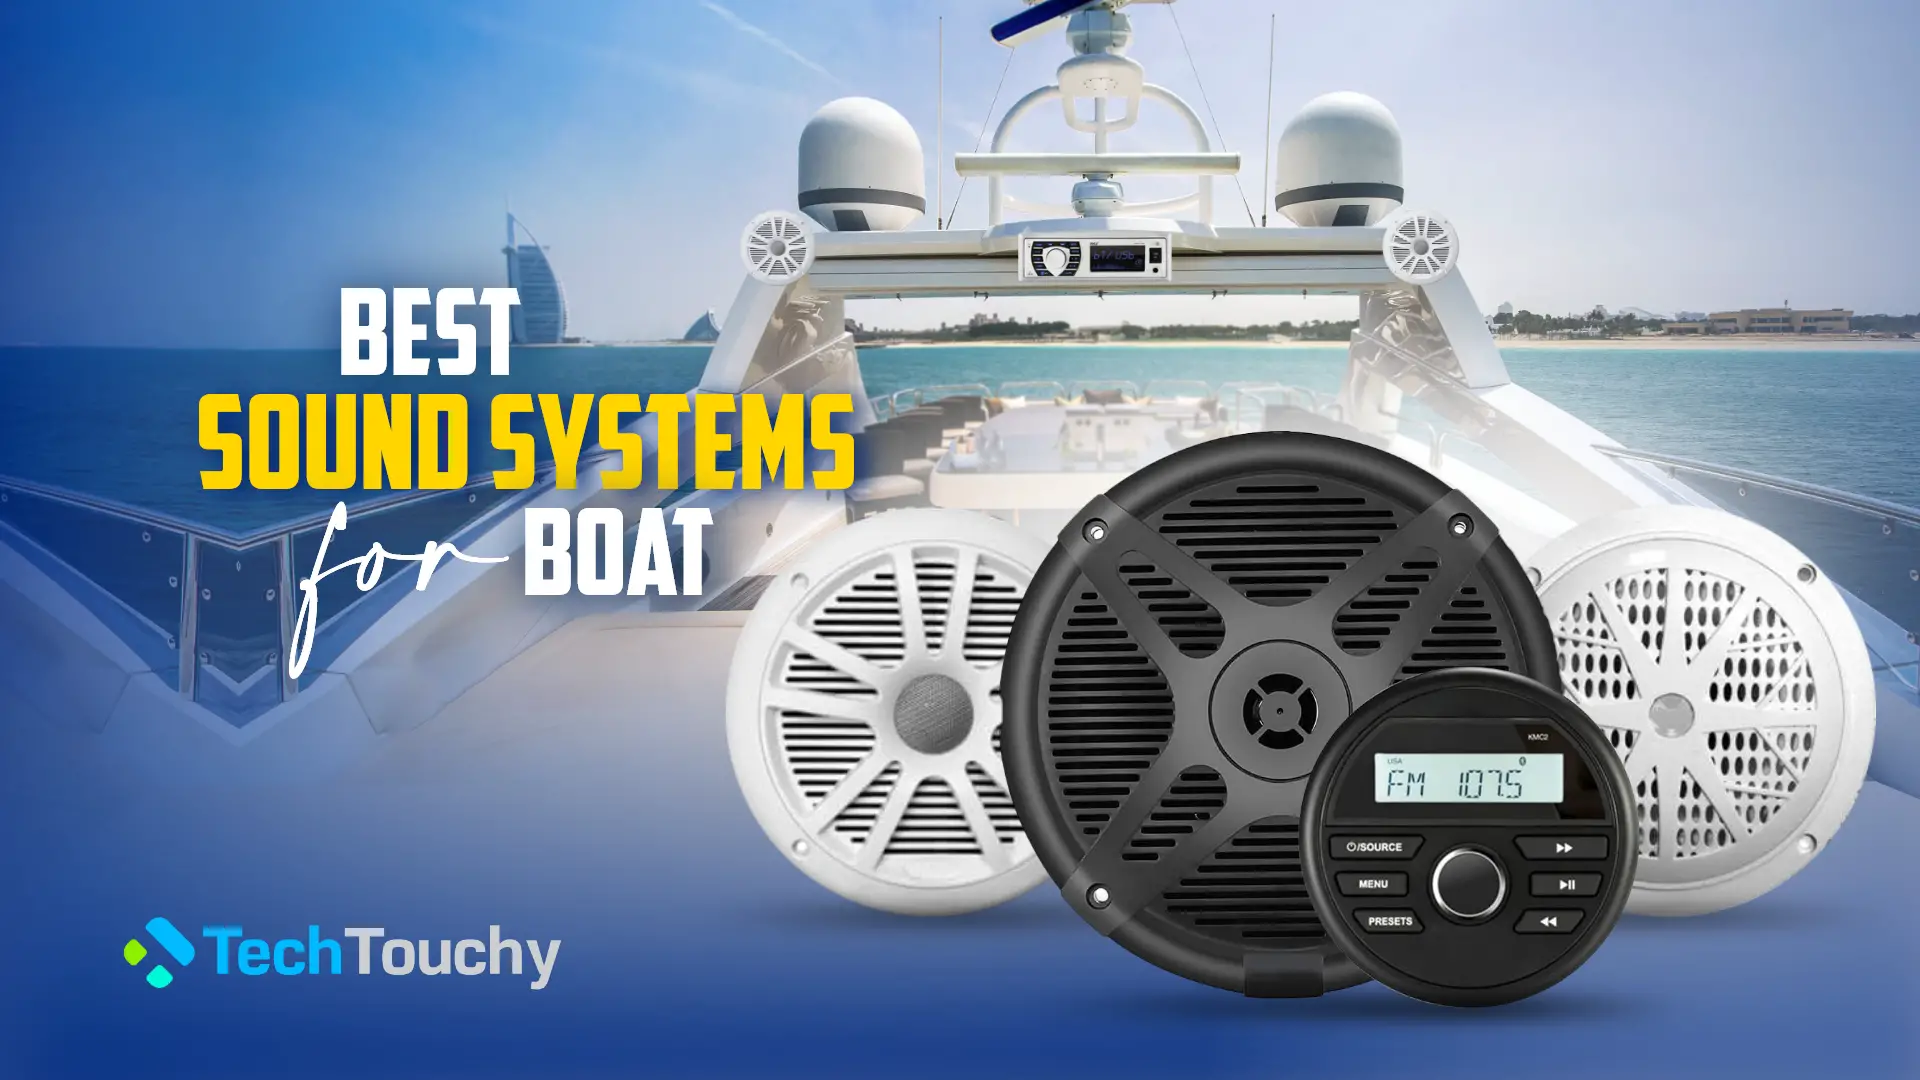 Best Sound Systems for Boat